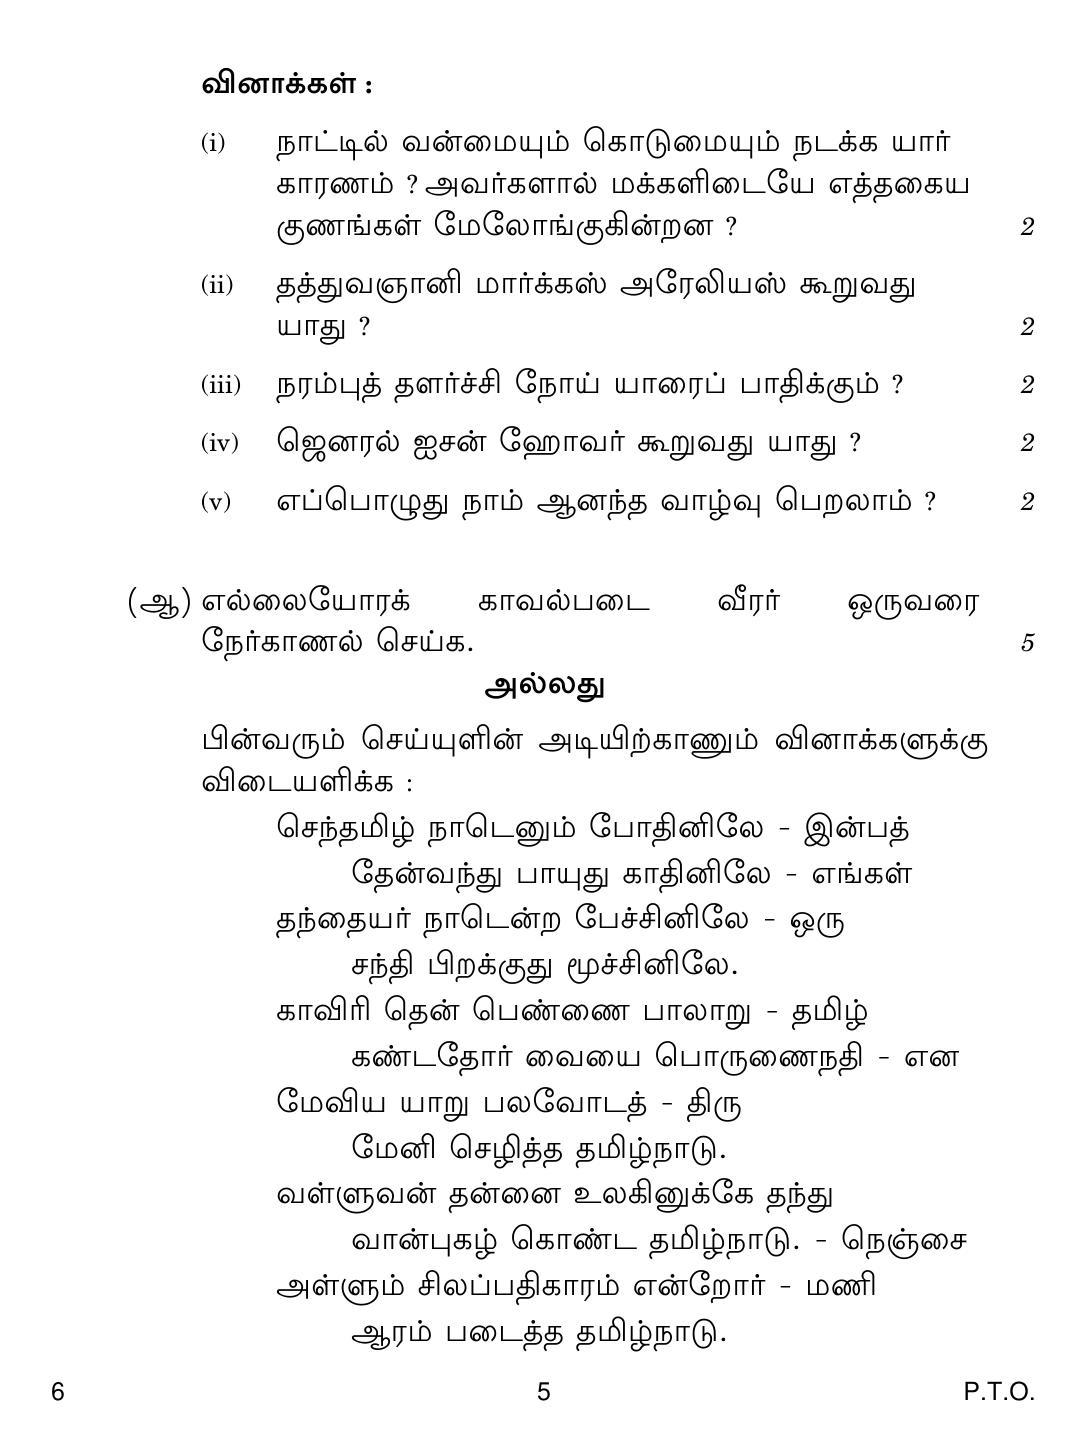 CBSE Class 12 6 Tamil 2018 Question Paper - Page 5